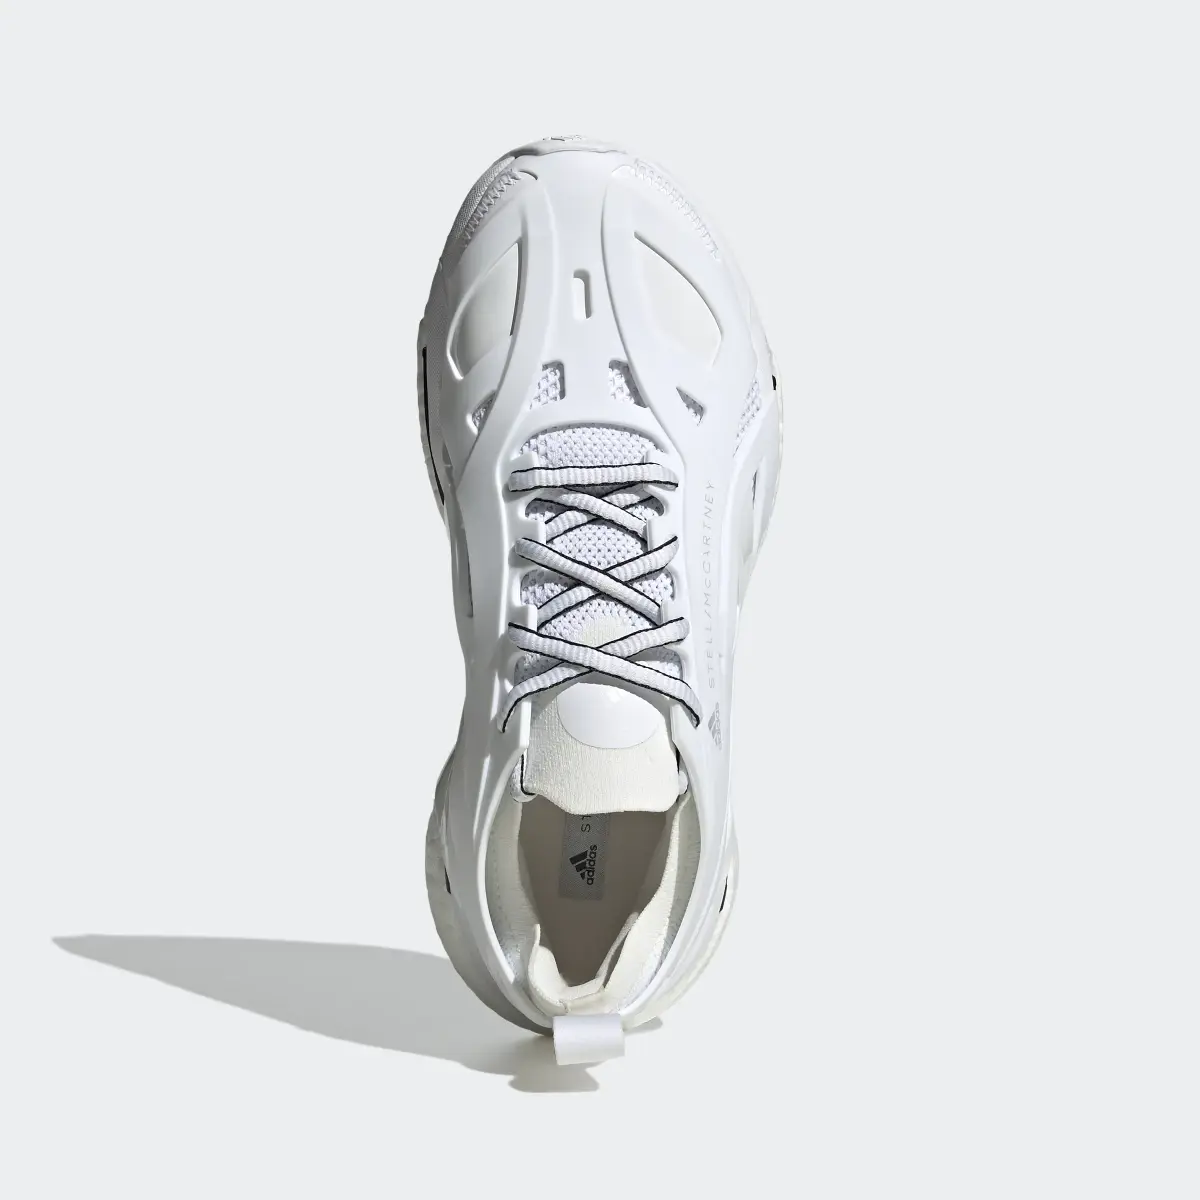 Adidas by Stella McCartney Solarglide Running Shoes. 3